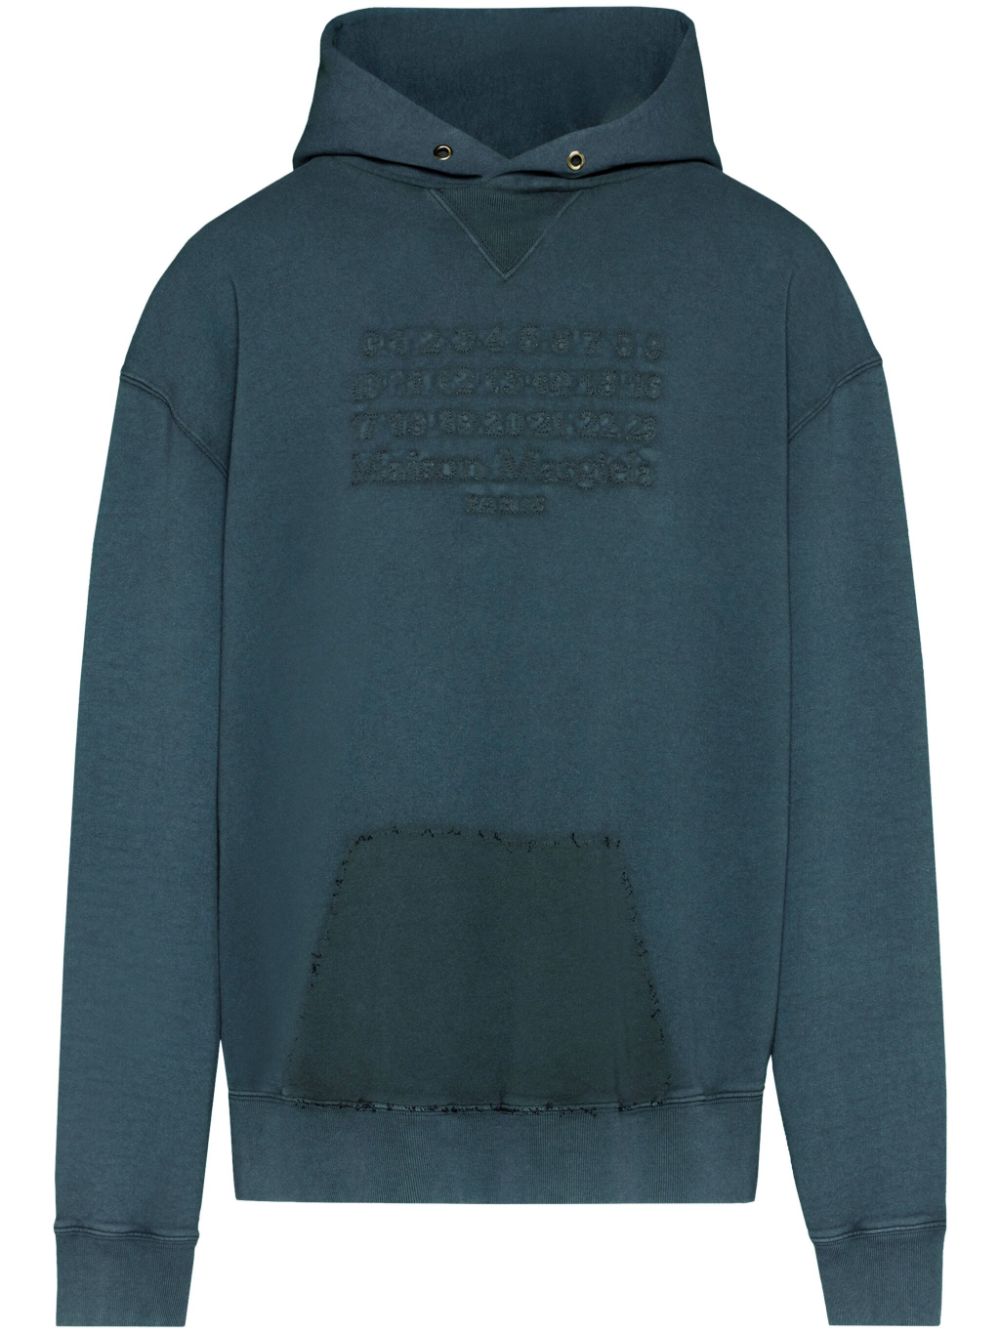 Teal blue cotton signature hoodie